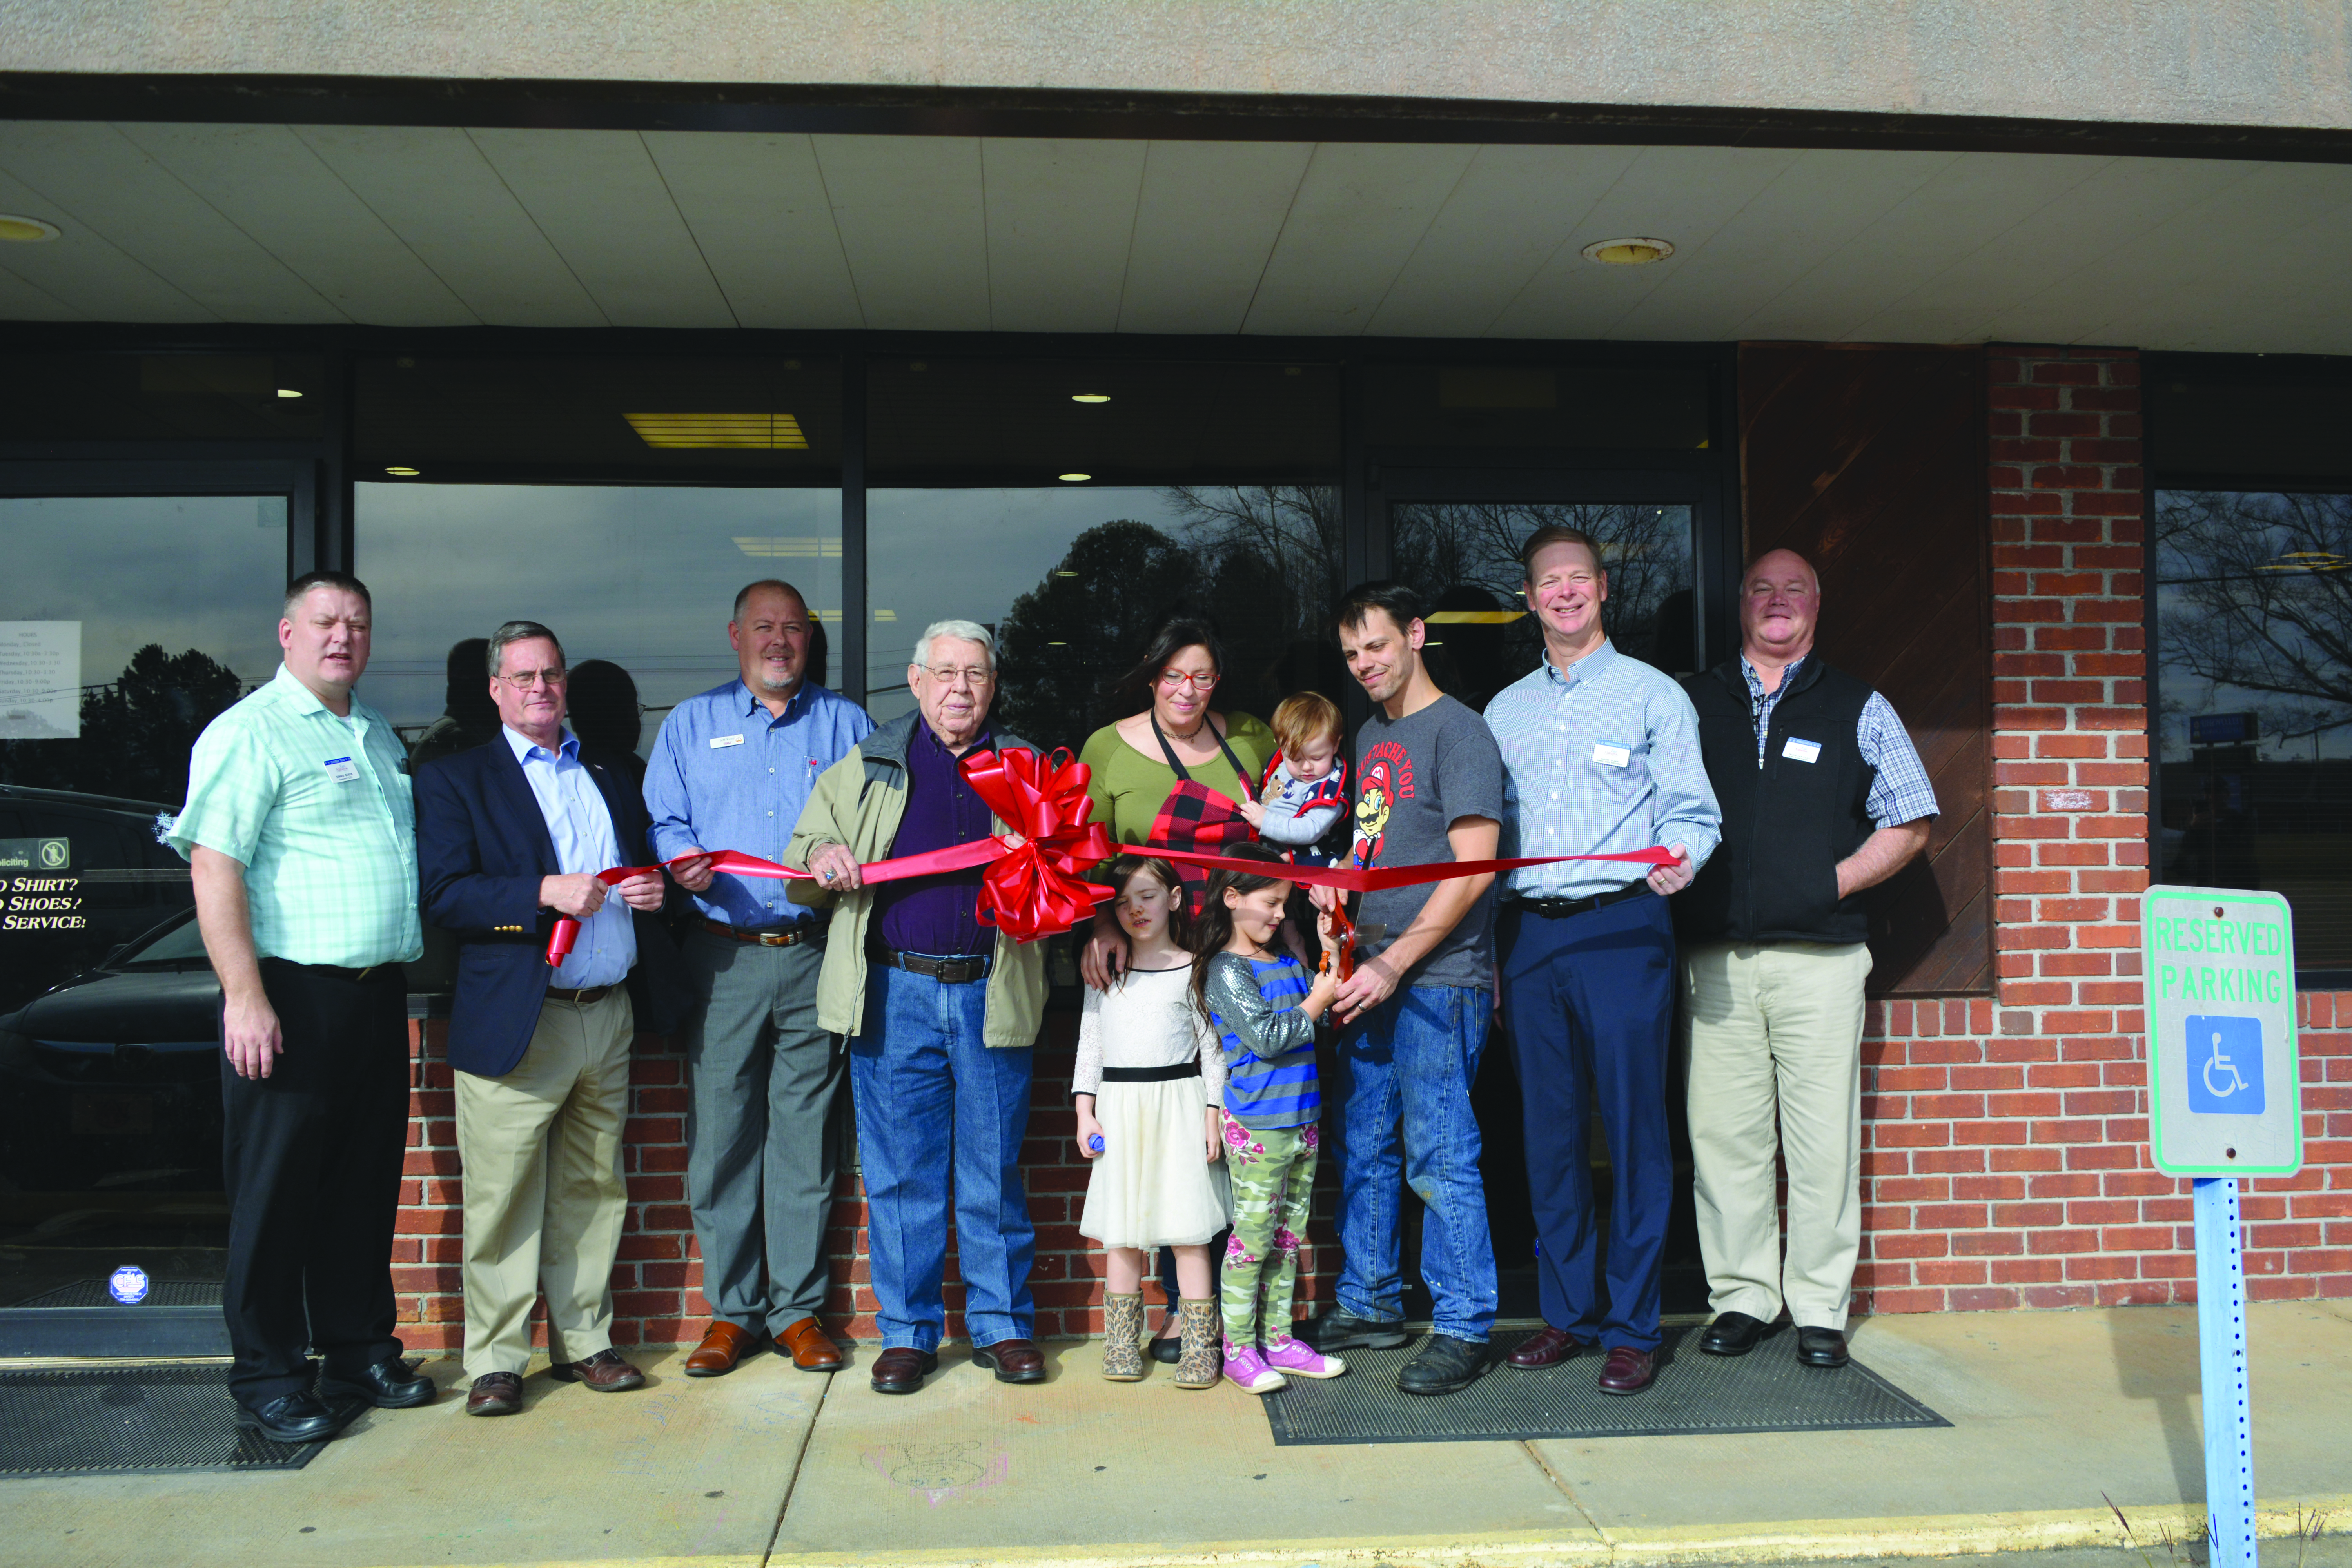 ‘The American Dream’ opened for business in downtown Smiths Station last week